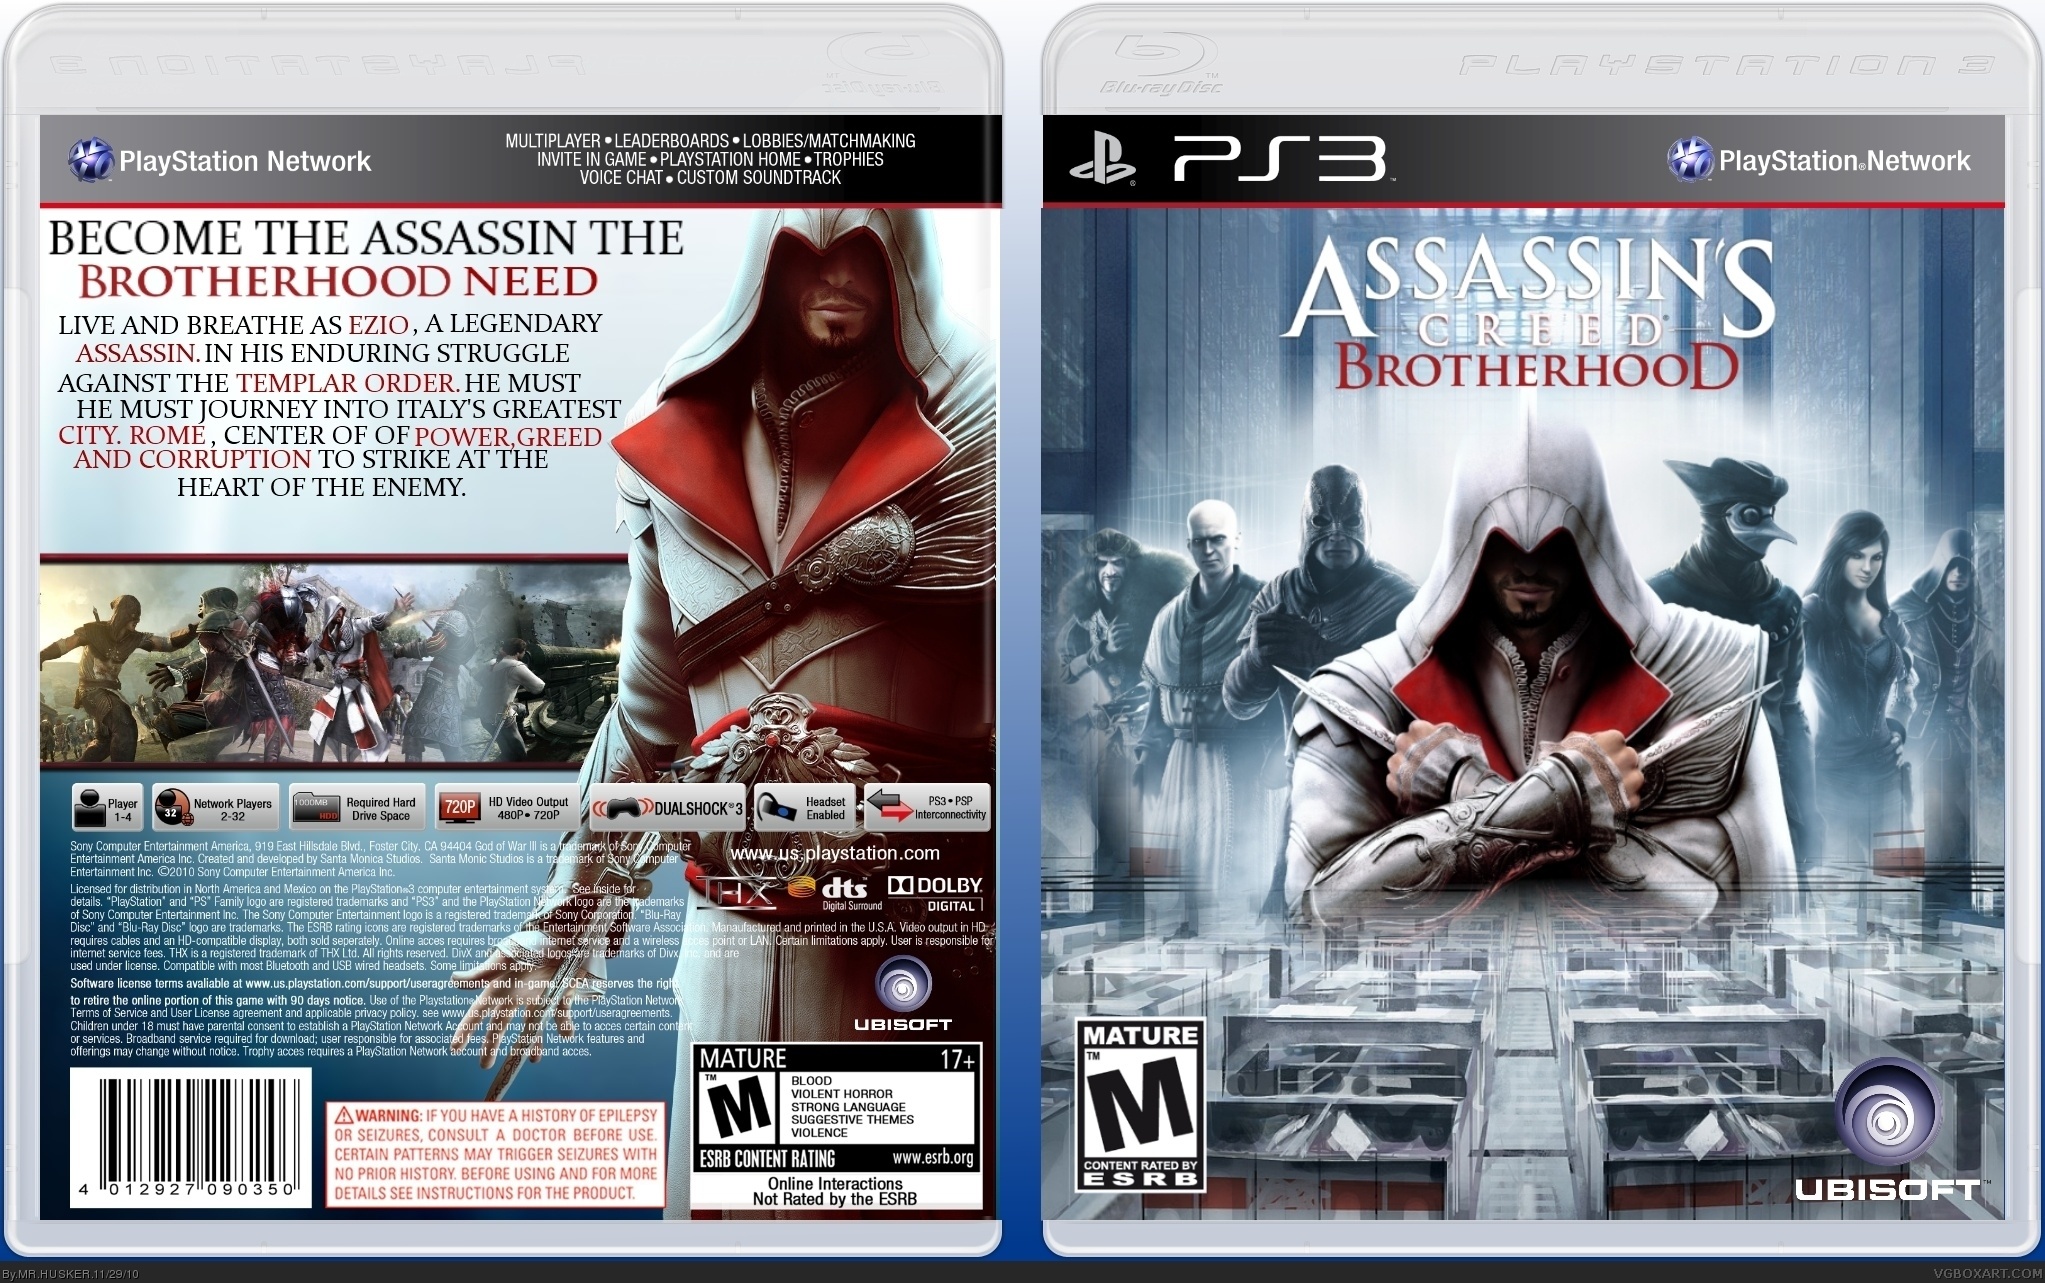 where are the circuit boxes in assassin creed brotherhood